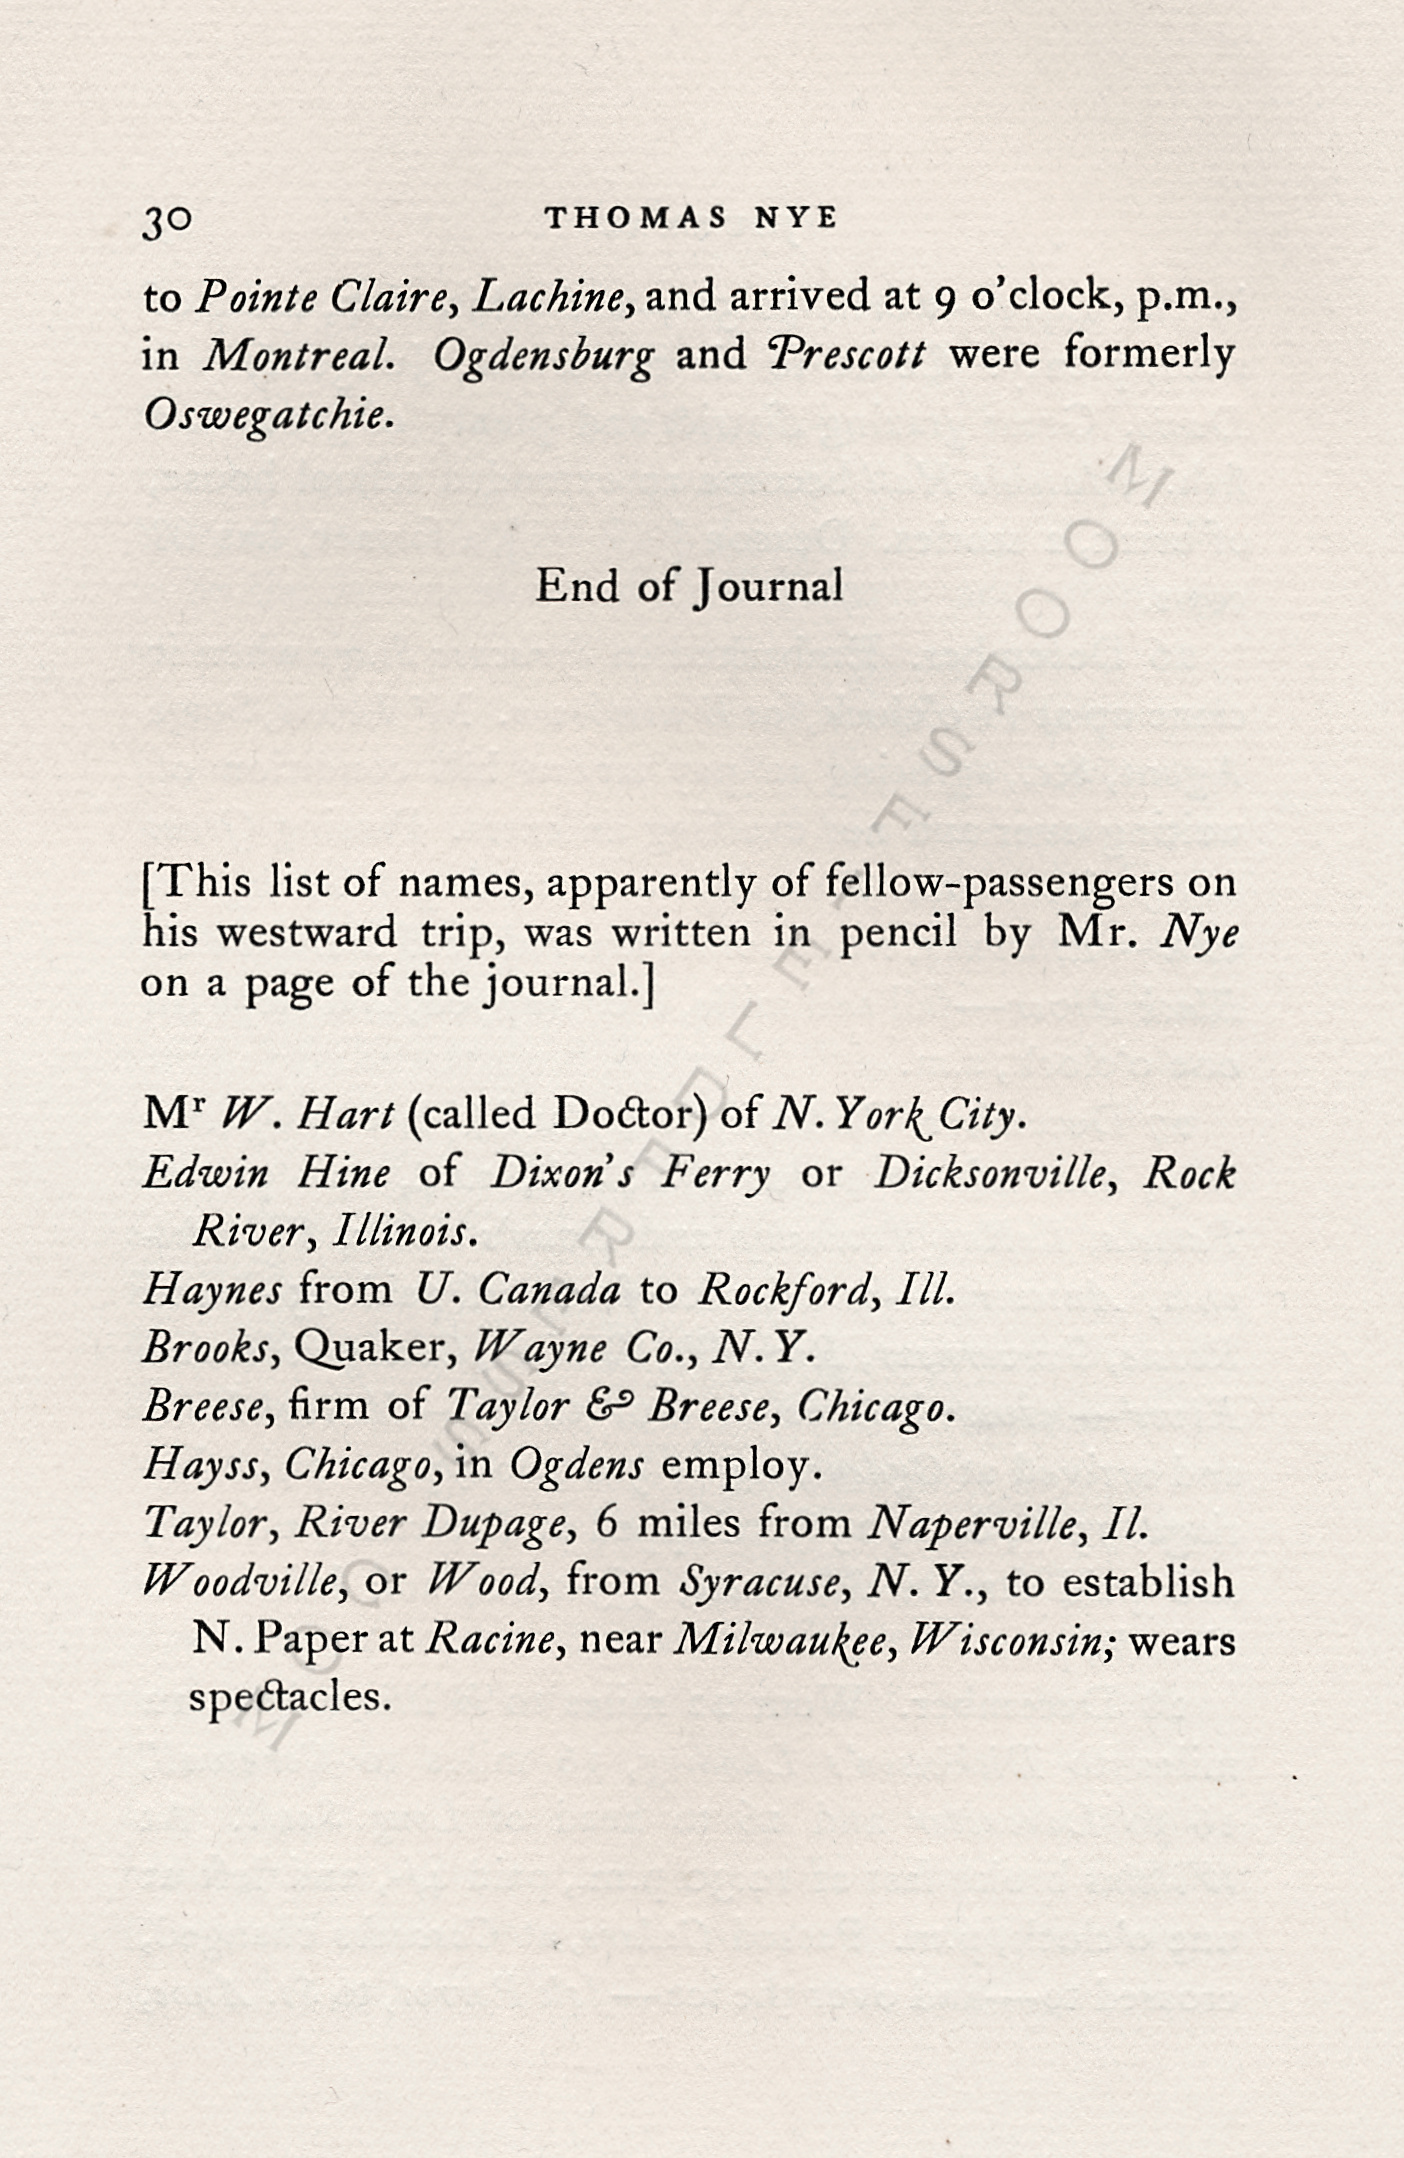 JOURNAL OF
                      THOMAS NYE WRITTEN DURING A JOURNEY BETWEEN
                      MONTREAL & CHICAGO IN 1837